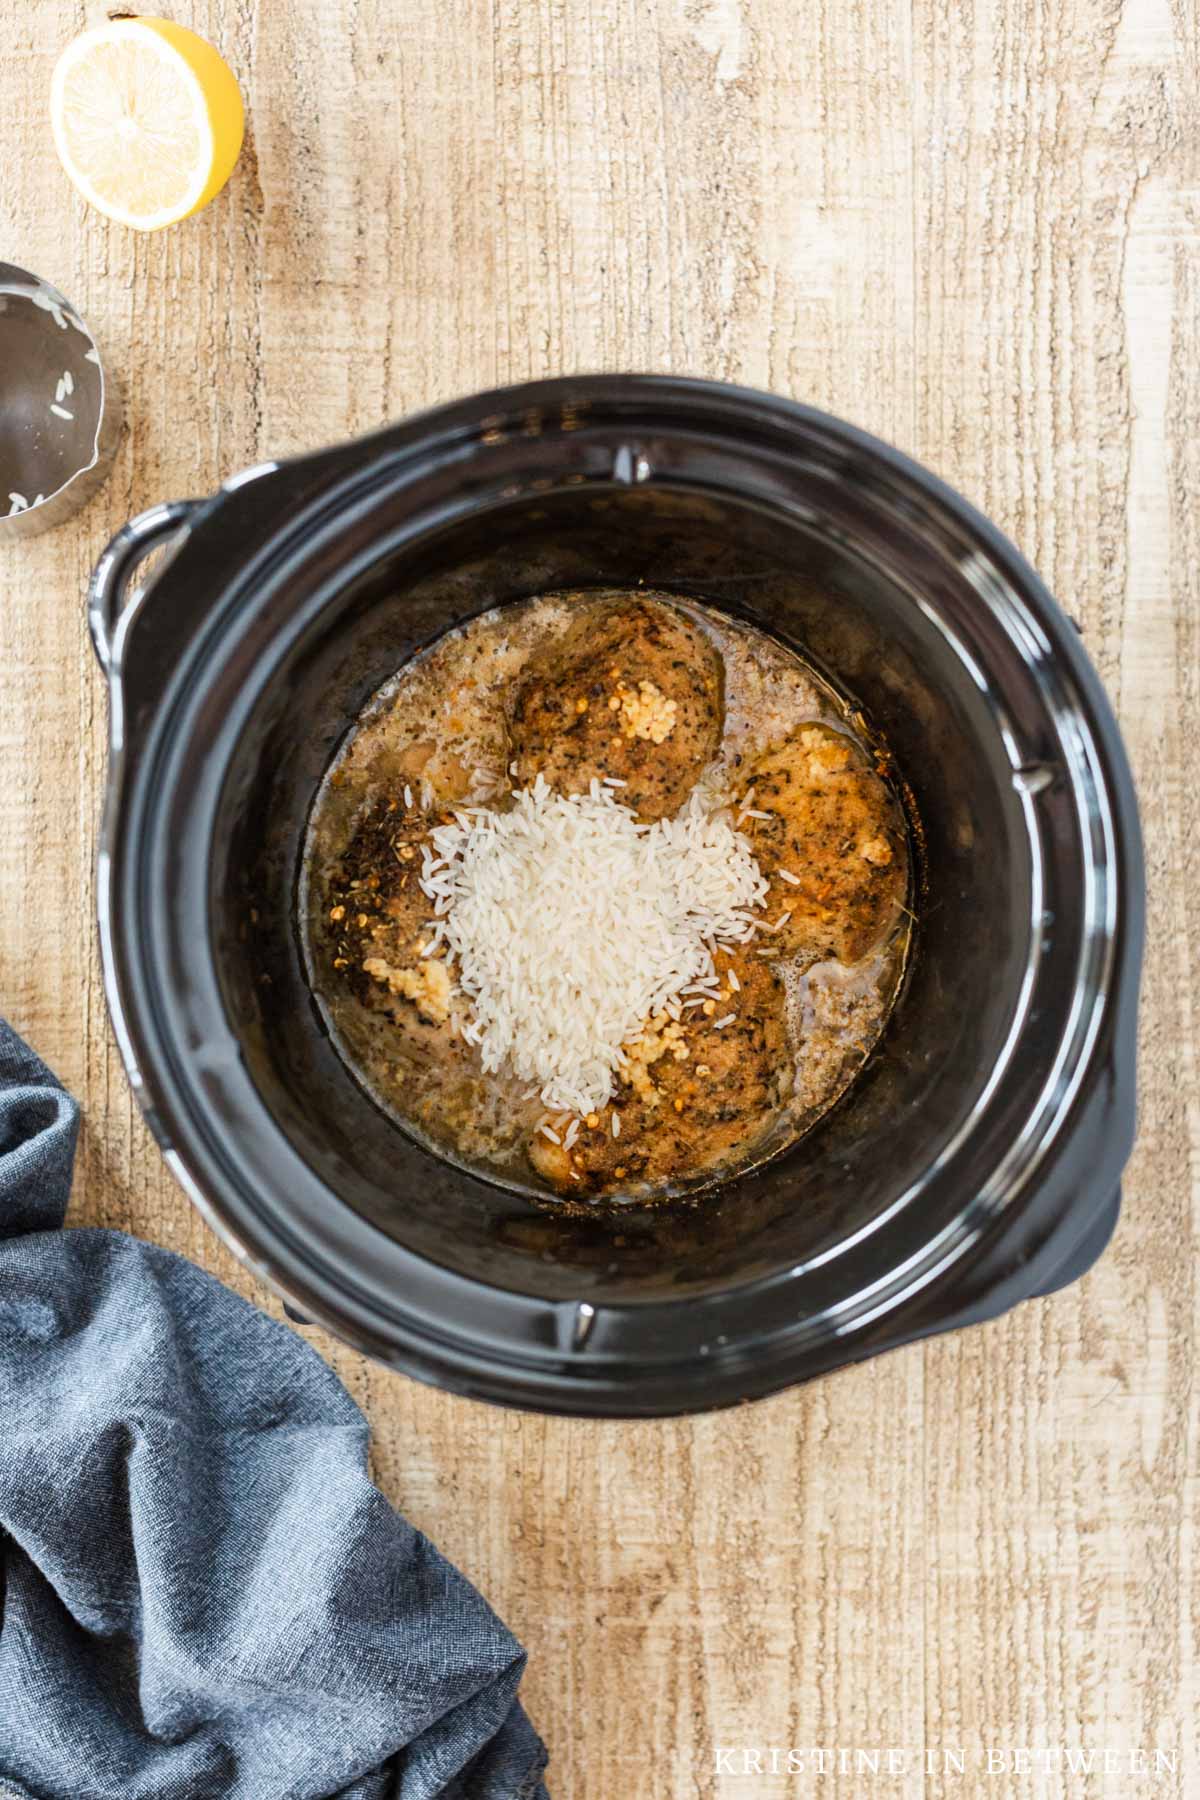 Rice added to cooked chicken thighs in a Crock-pot.